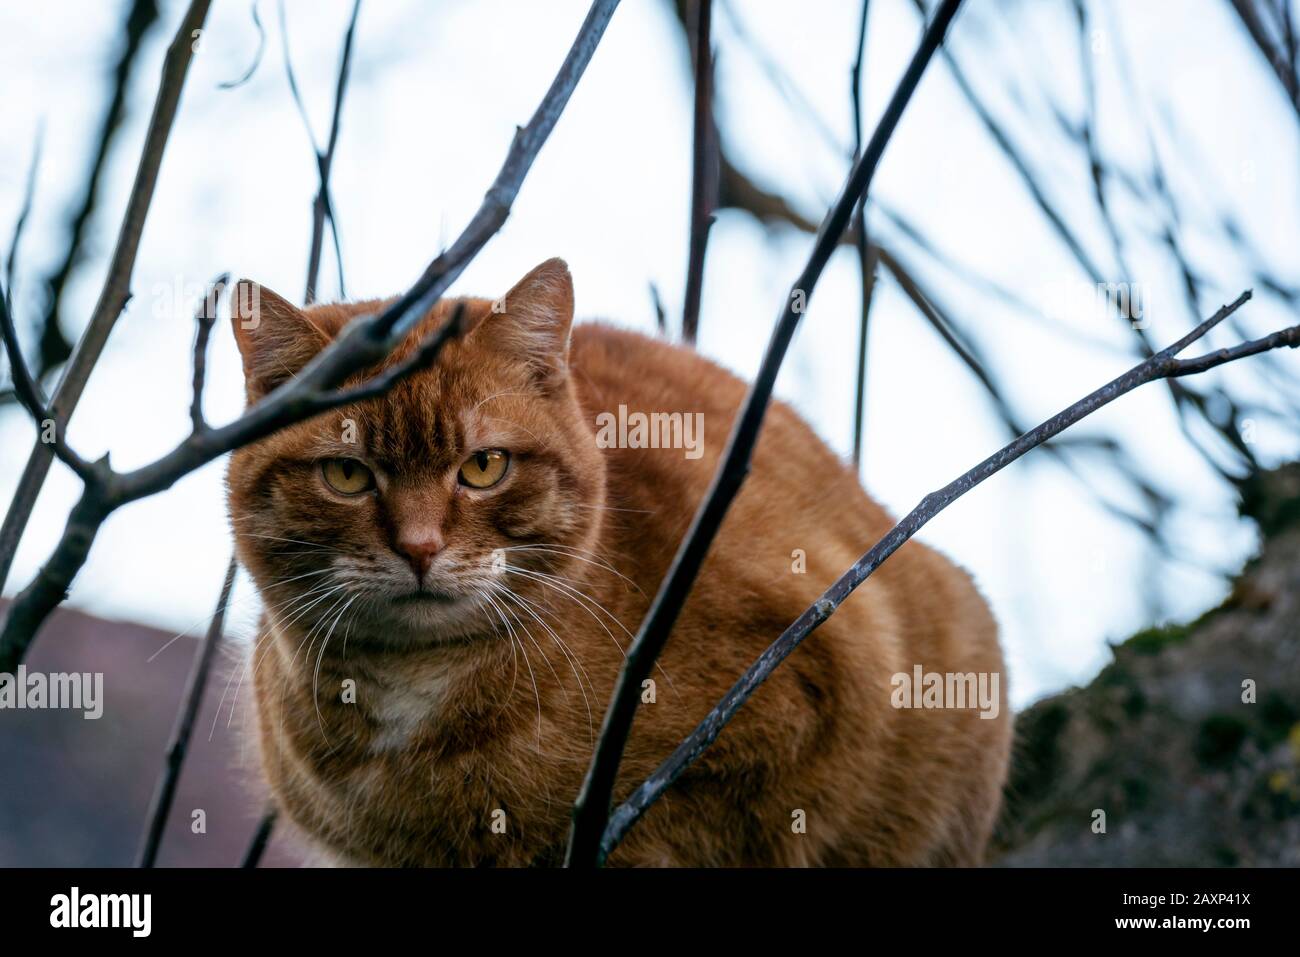 Young cat with fluffy orange fur. Funny domestic cat in a tree. Kitty looking into the camera. Animal portrait Stock Photo